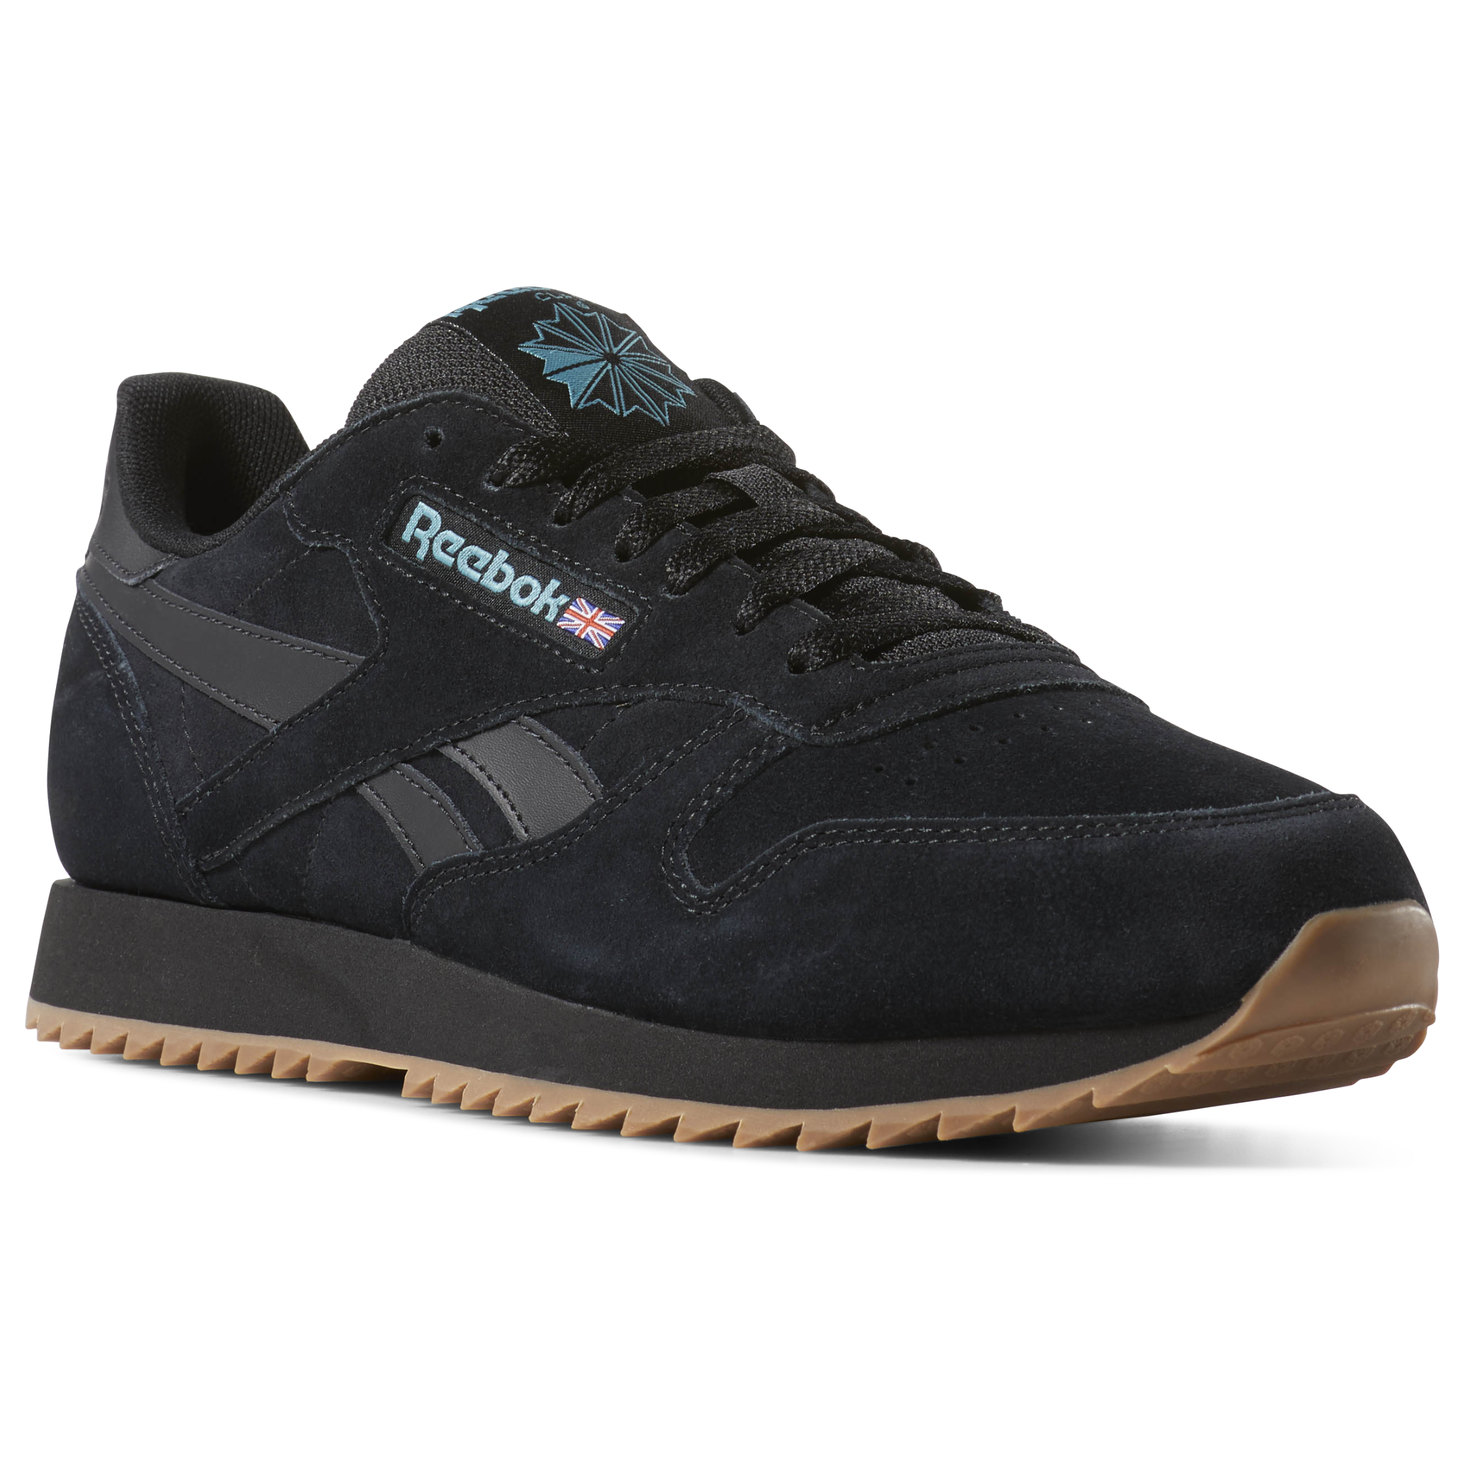 Classic Leather Montana Cans Shoes Reebok